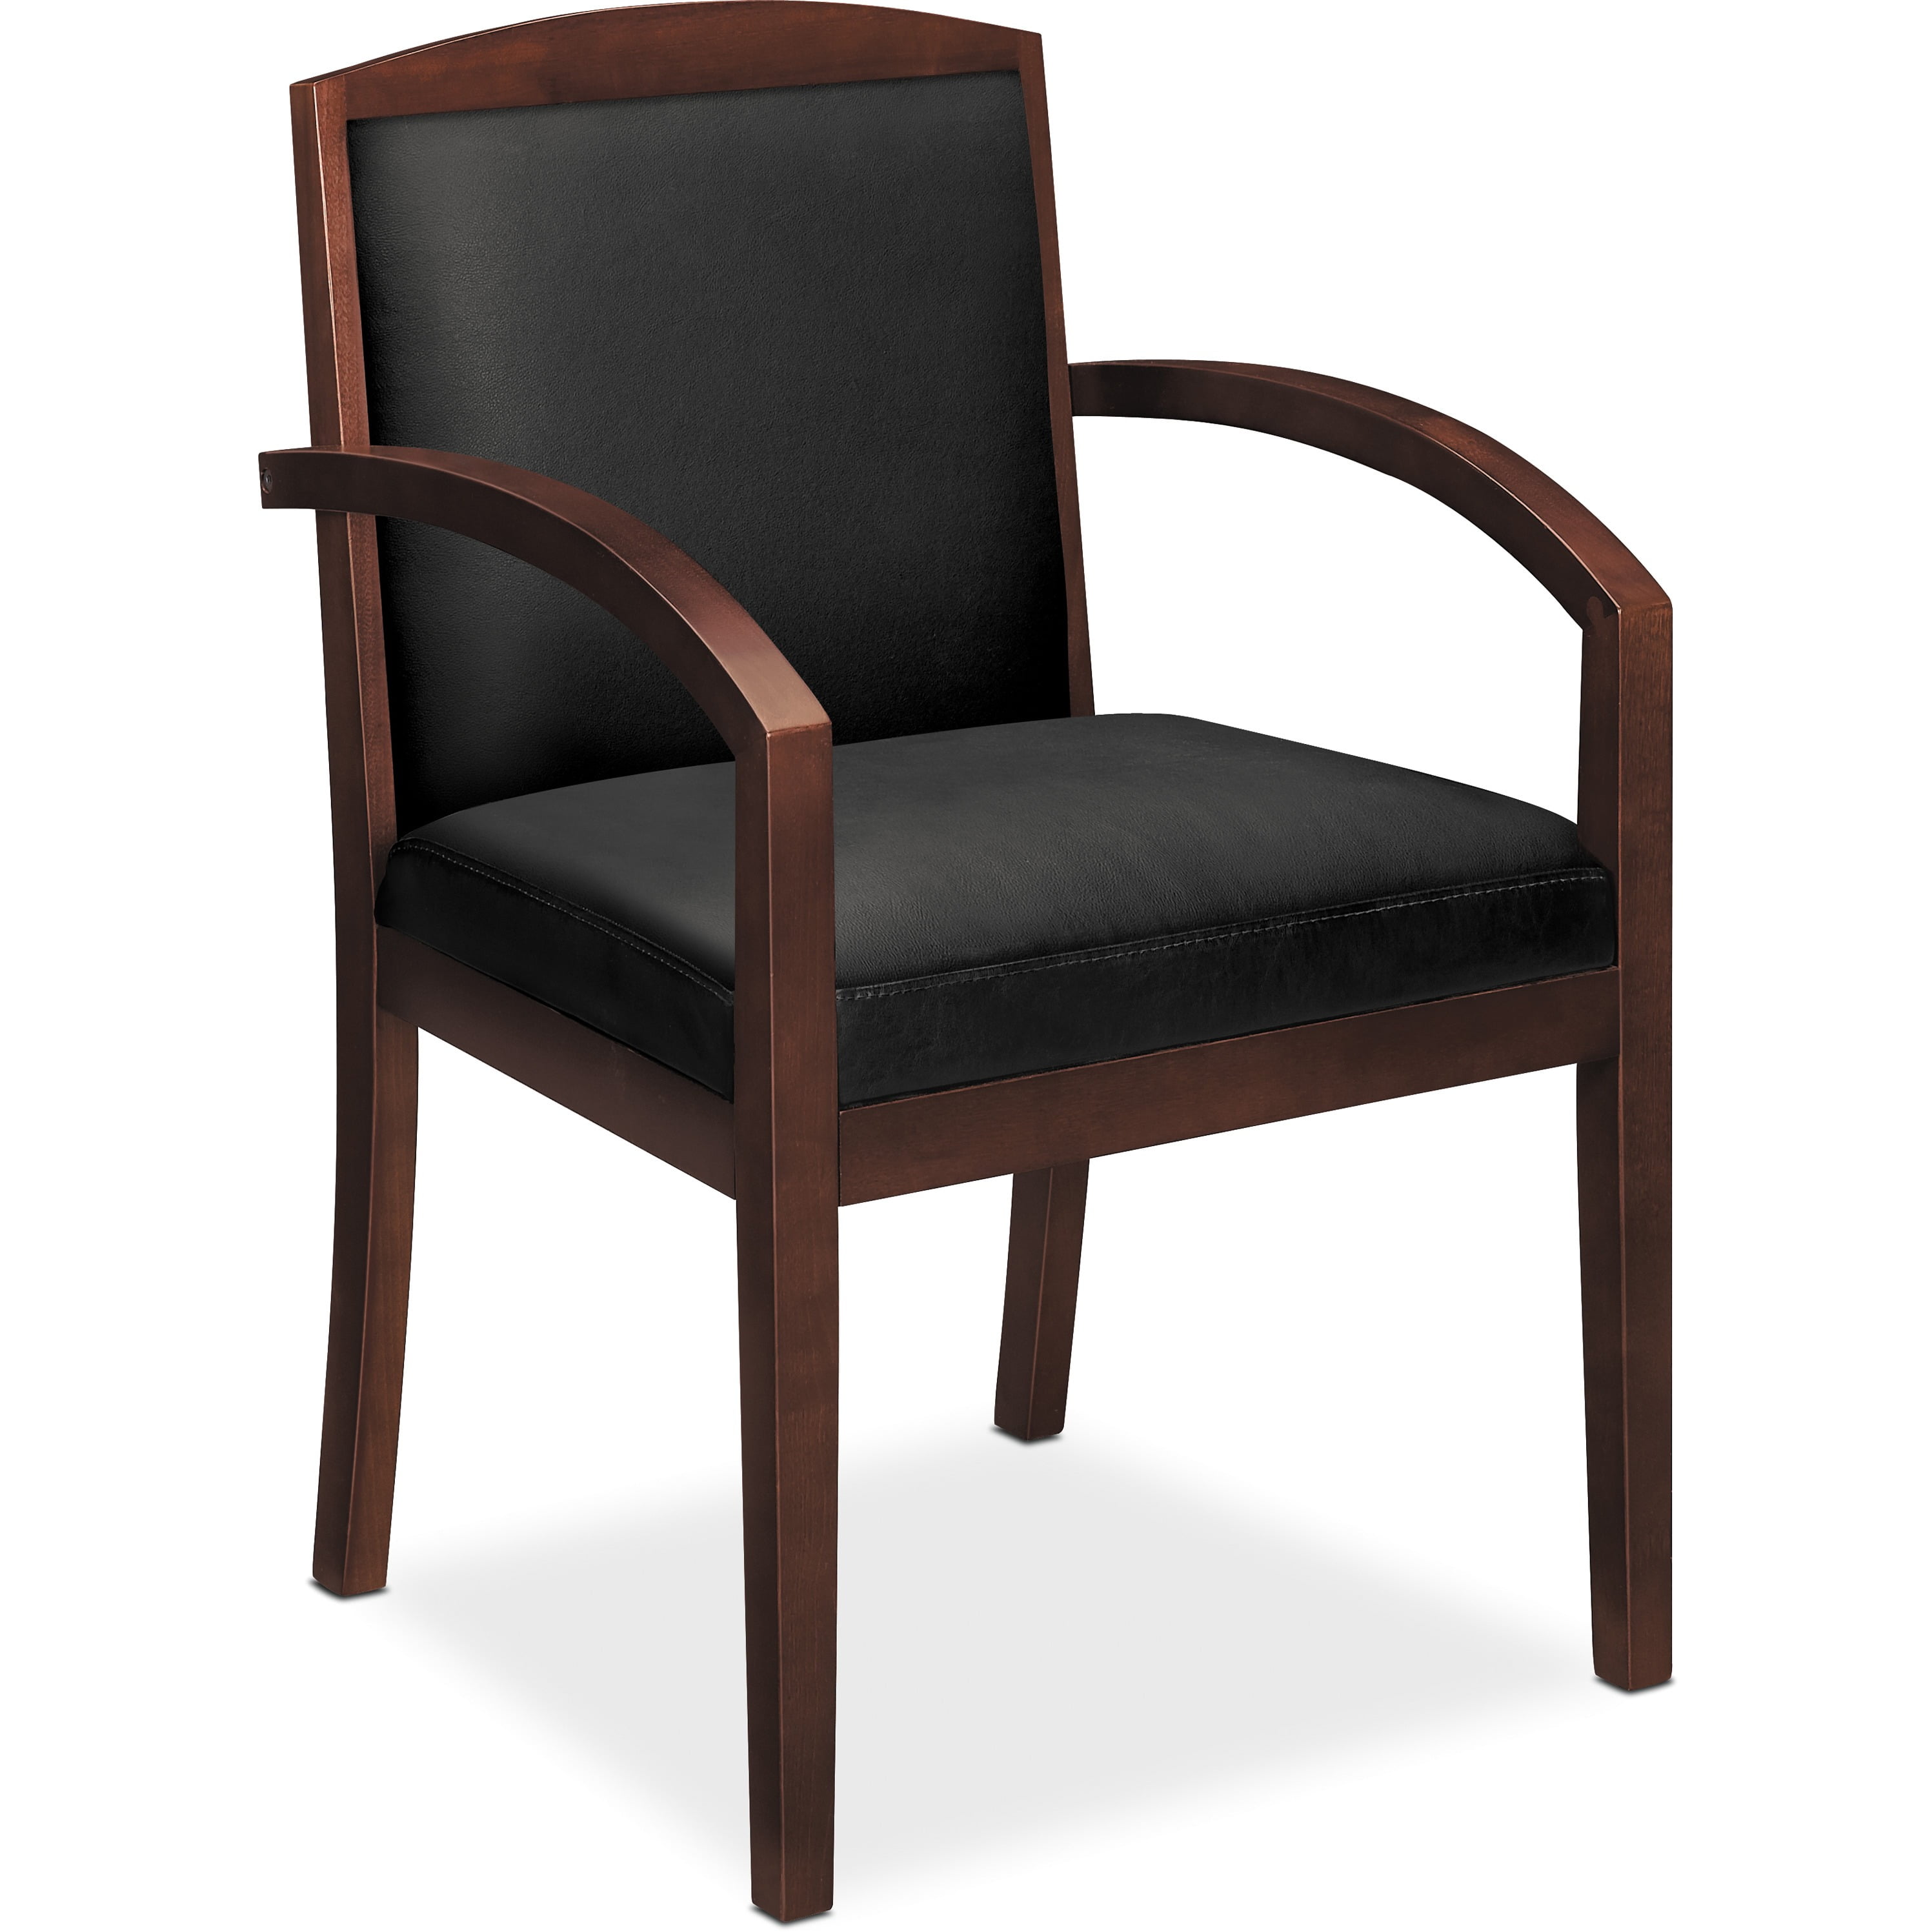 basyx VL850 Series Wood Guest Reception Waiting Room Chair, Black